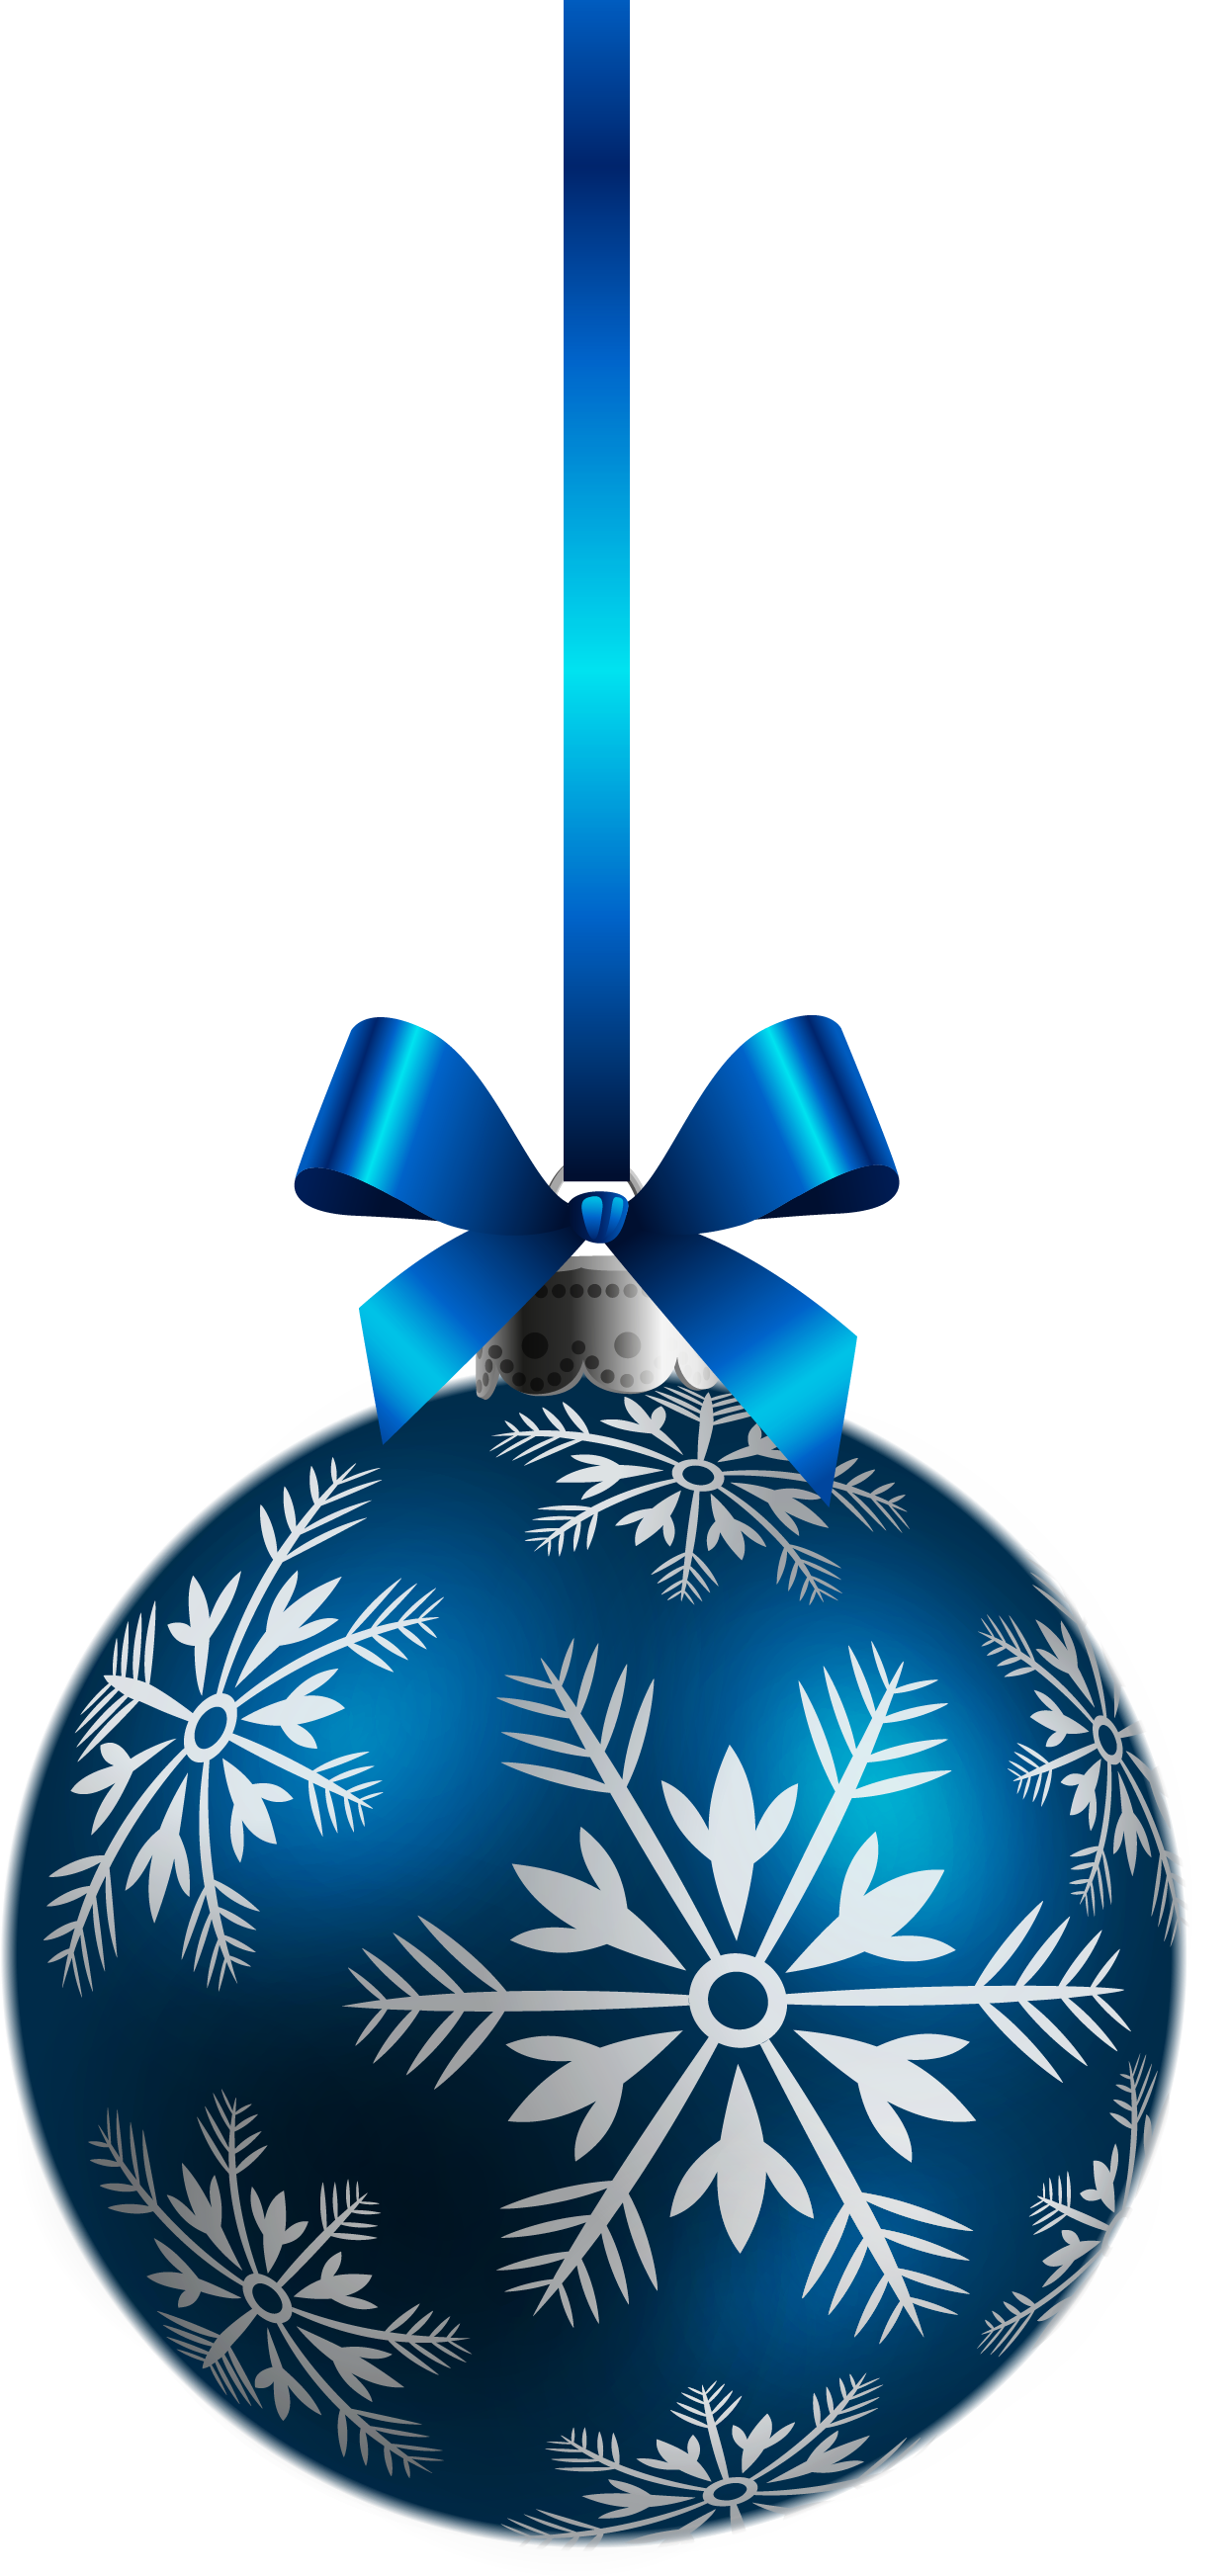 Blue Christmas Decorations Free Cliparts That You Can Download To    